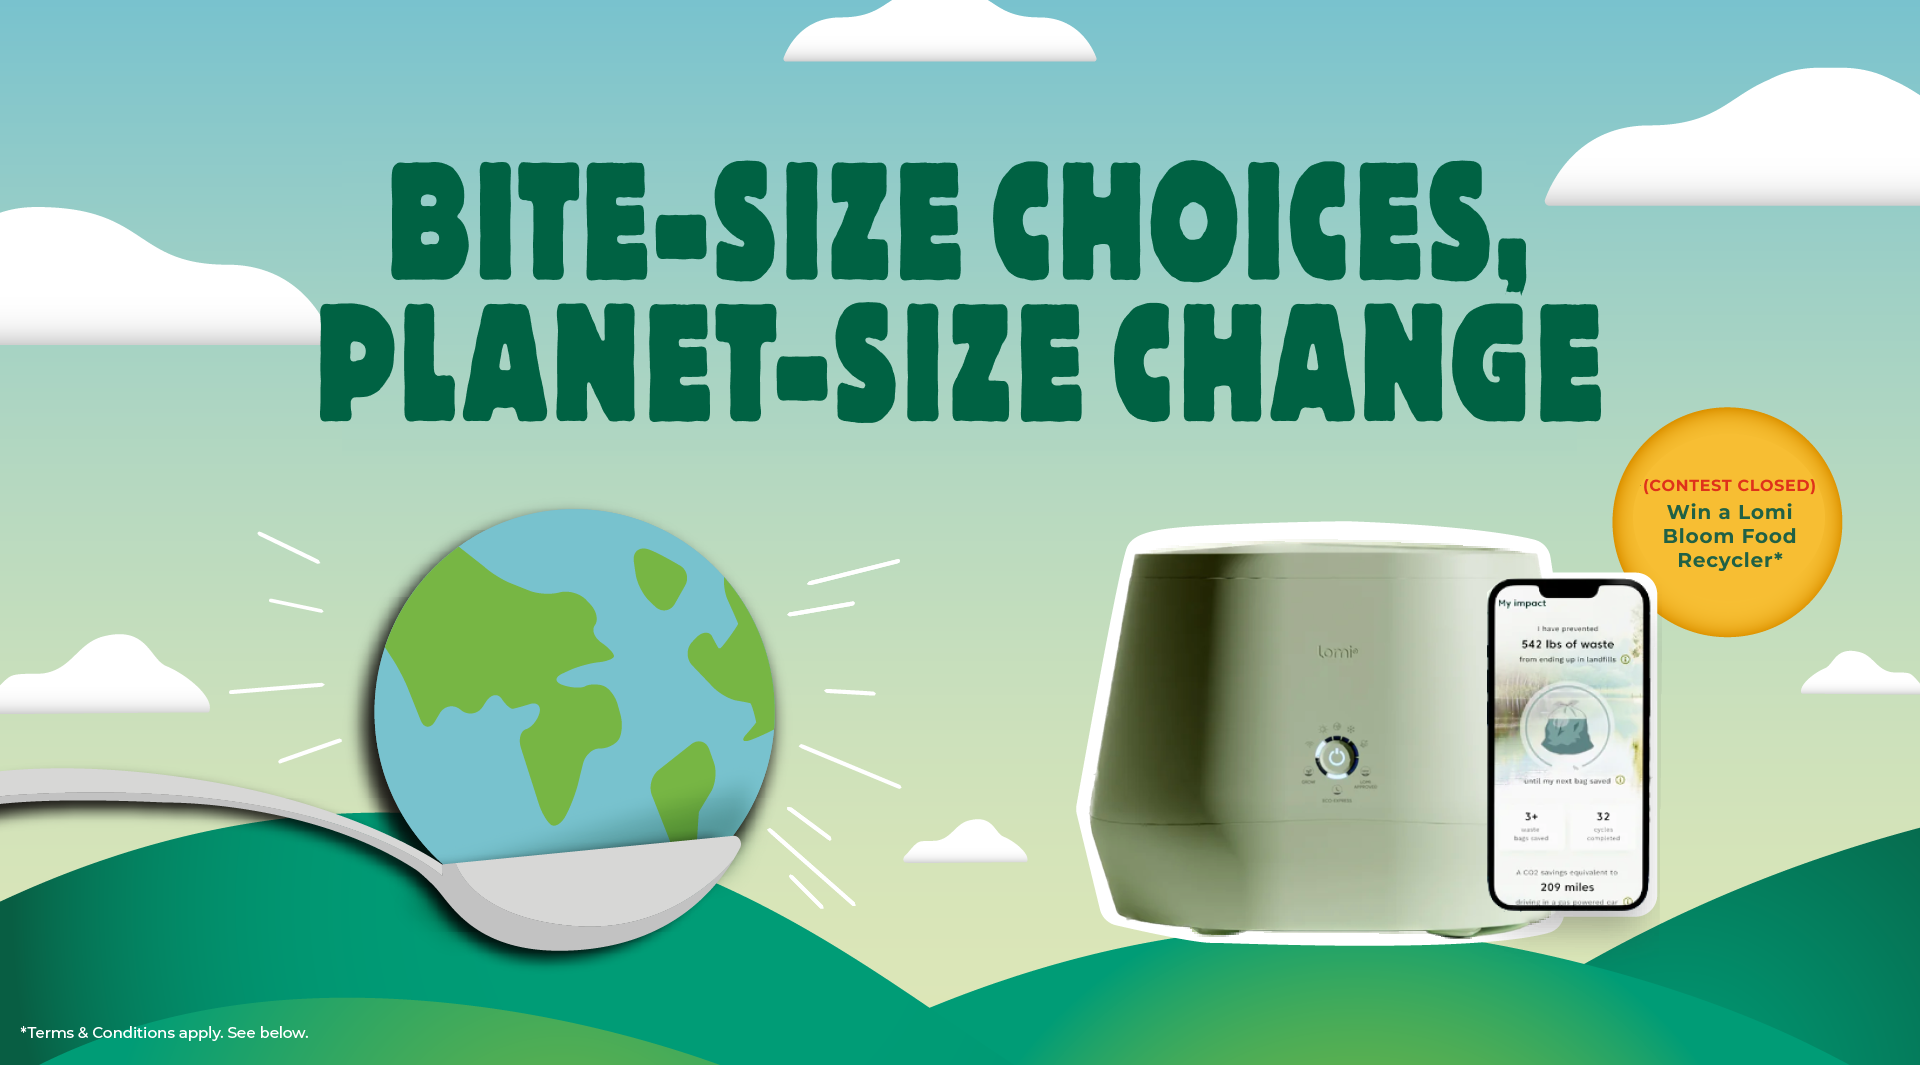 Illustration promoting sustainability with the Earth and a food recycling appliance, including text 'Bite-Size Choices, Planet-Size Change'.